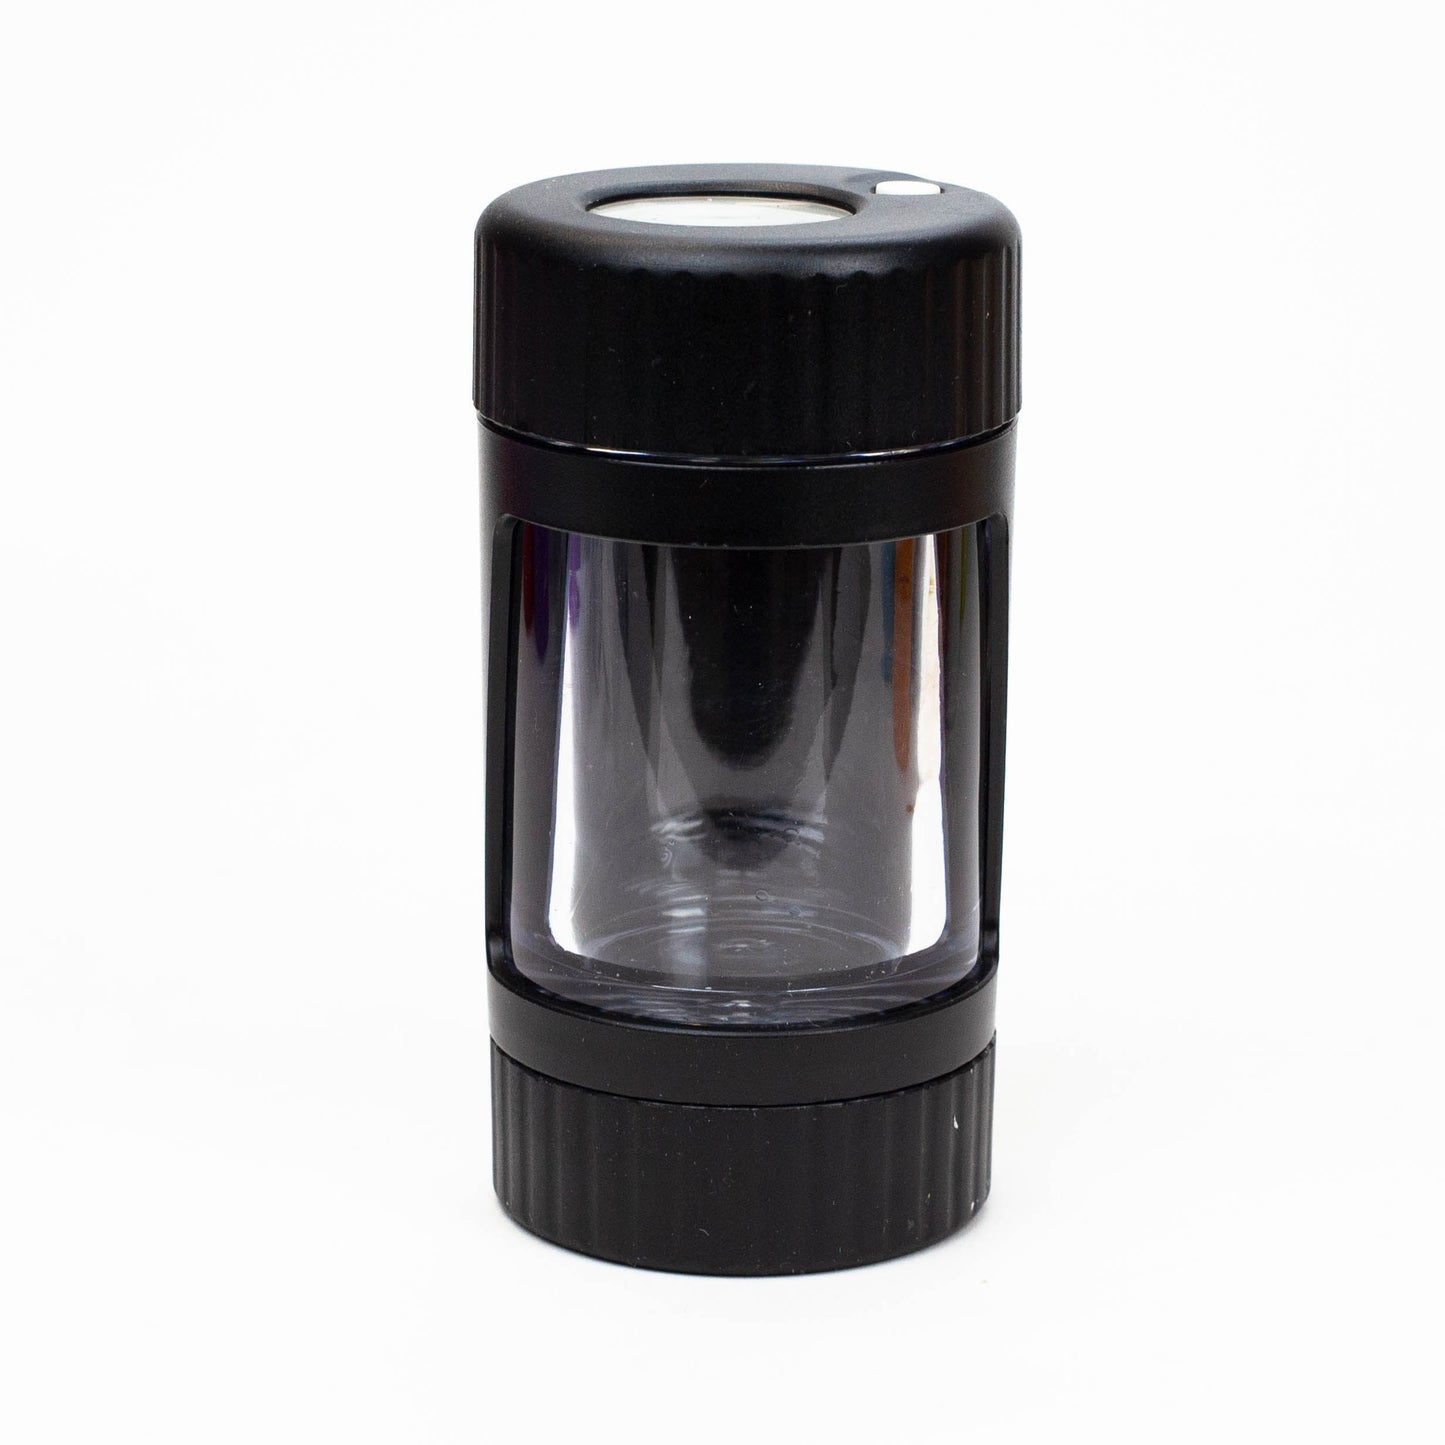 4-in-1 Magnify Led Jar with a grinder and one hitter Smoke Drop Black 